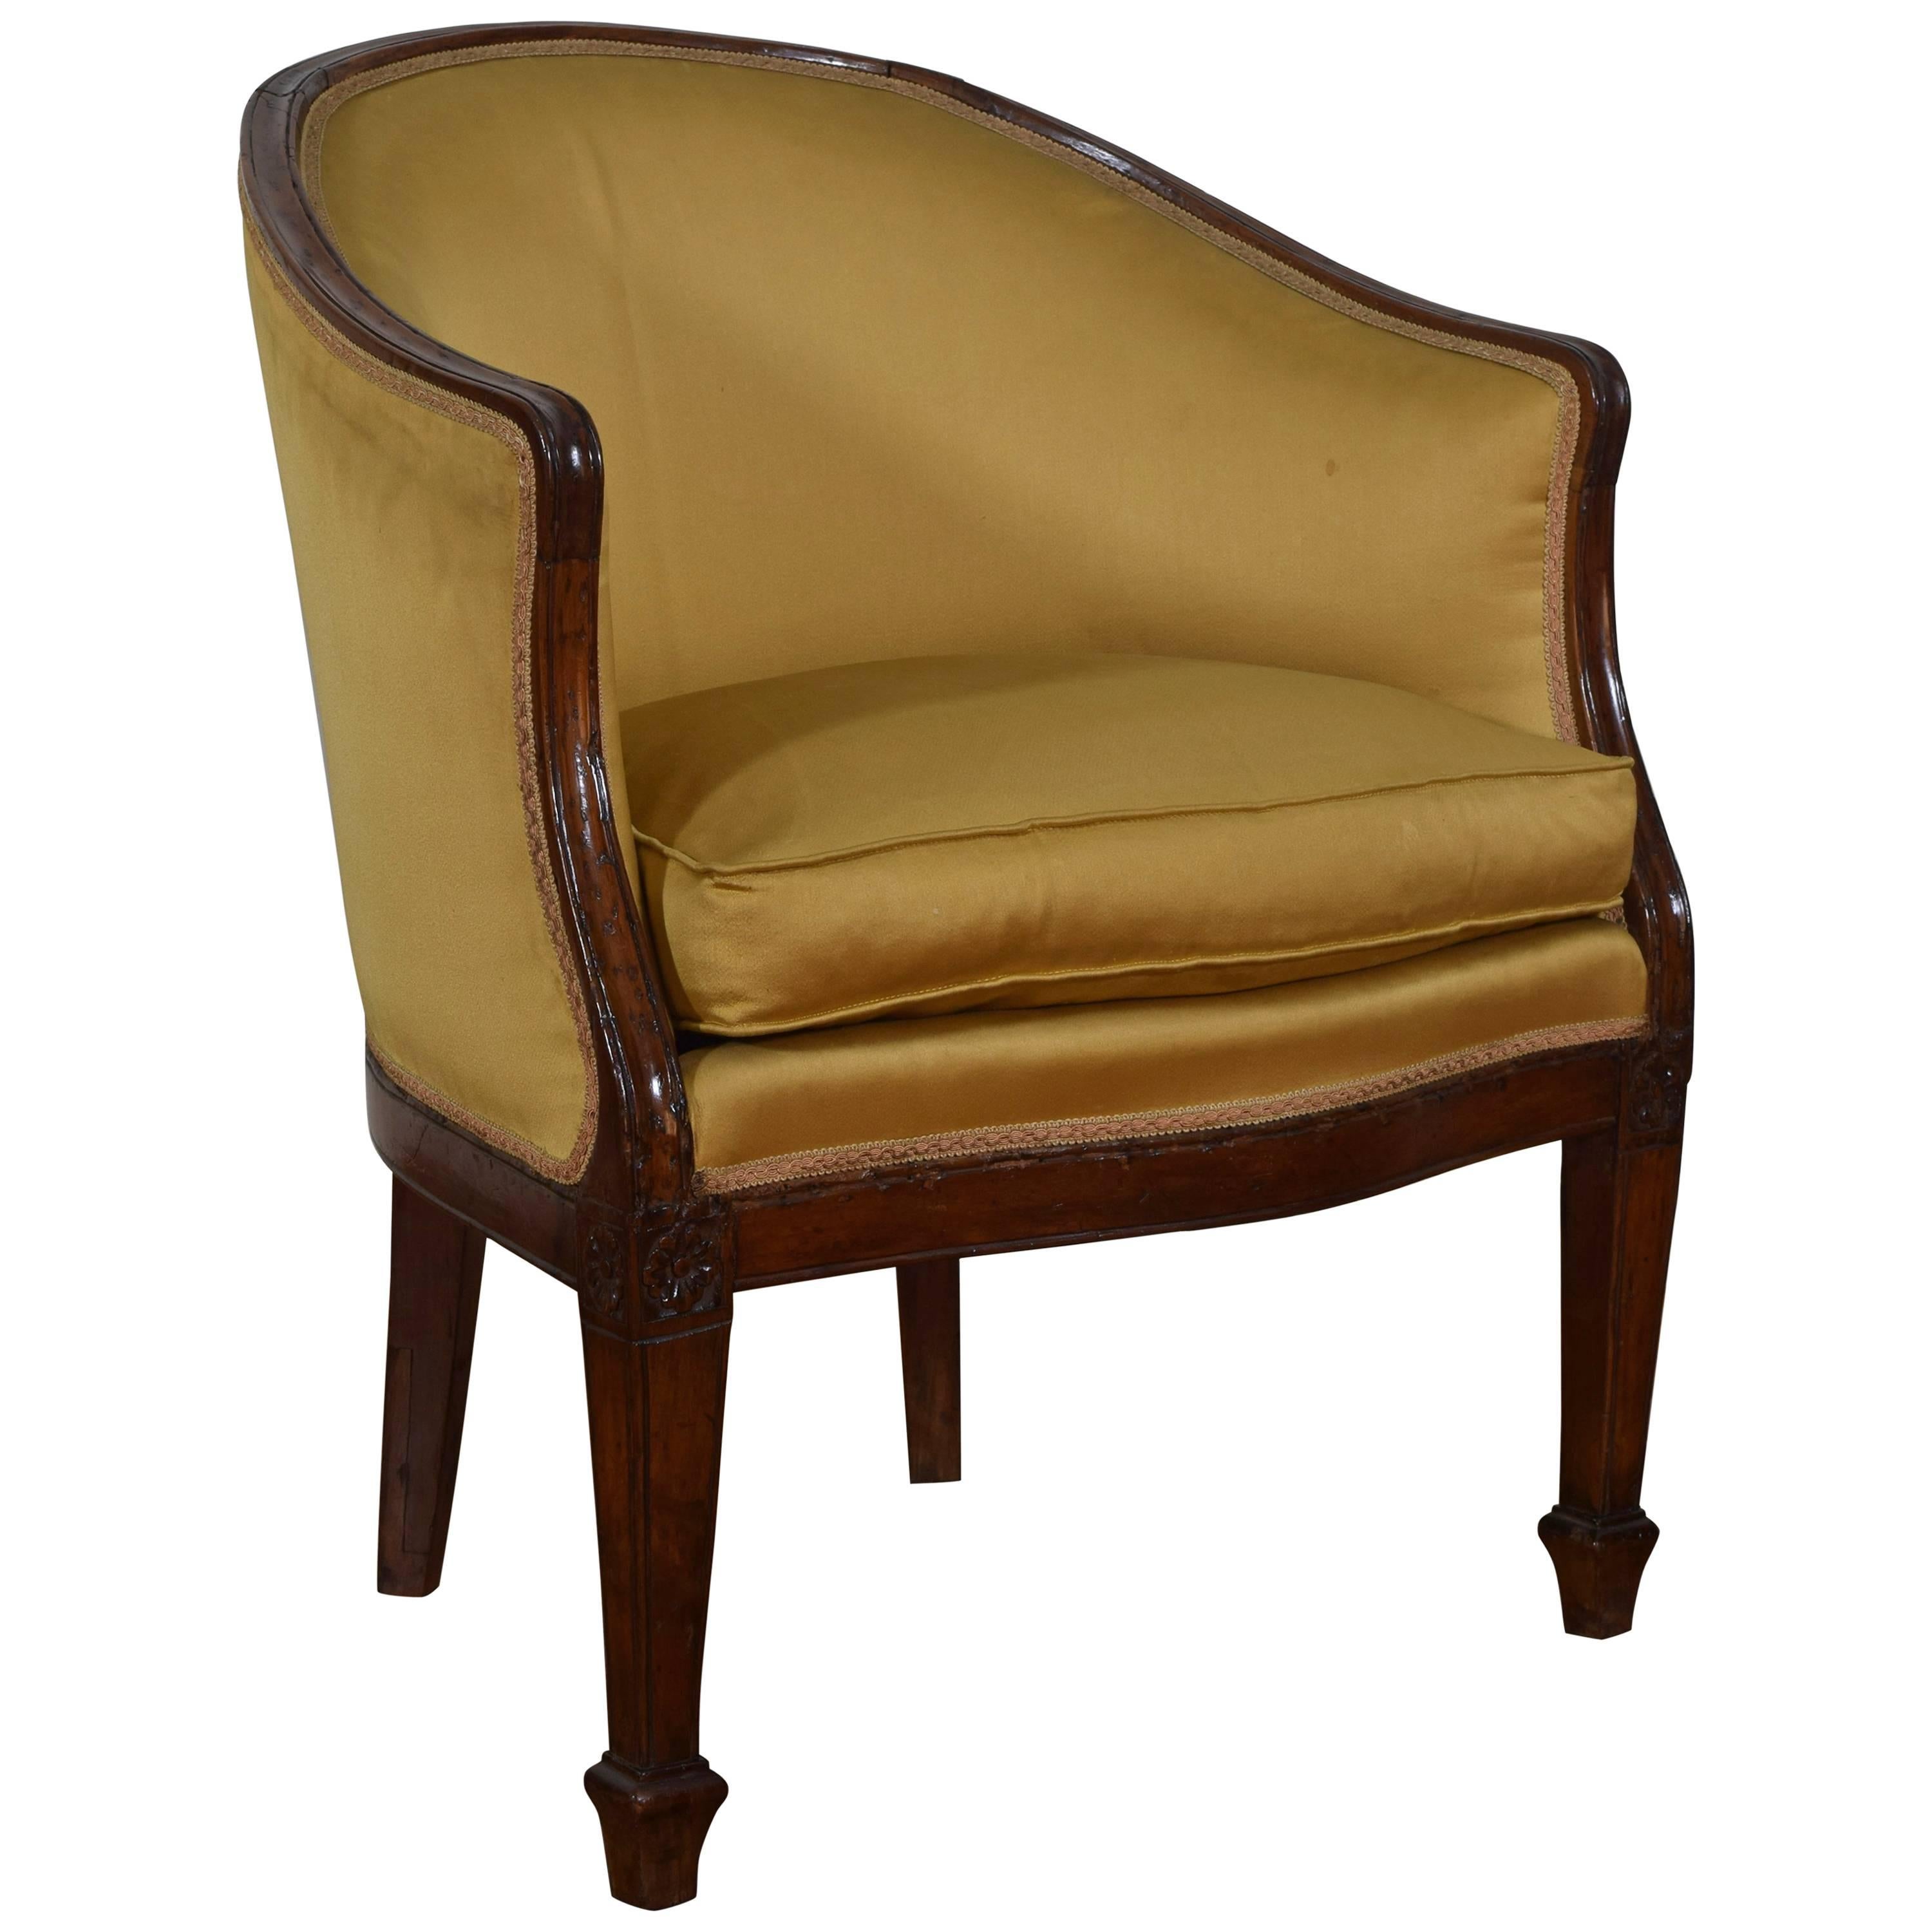 Italian Neoclassical Walnut and Upholstered Bergere in Empire Taste 19th Century